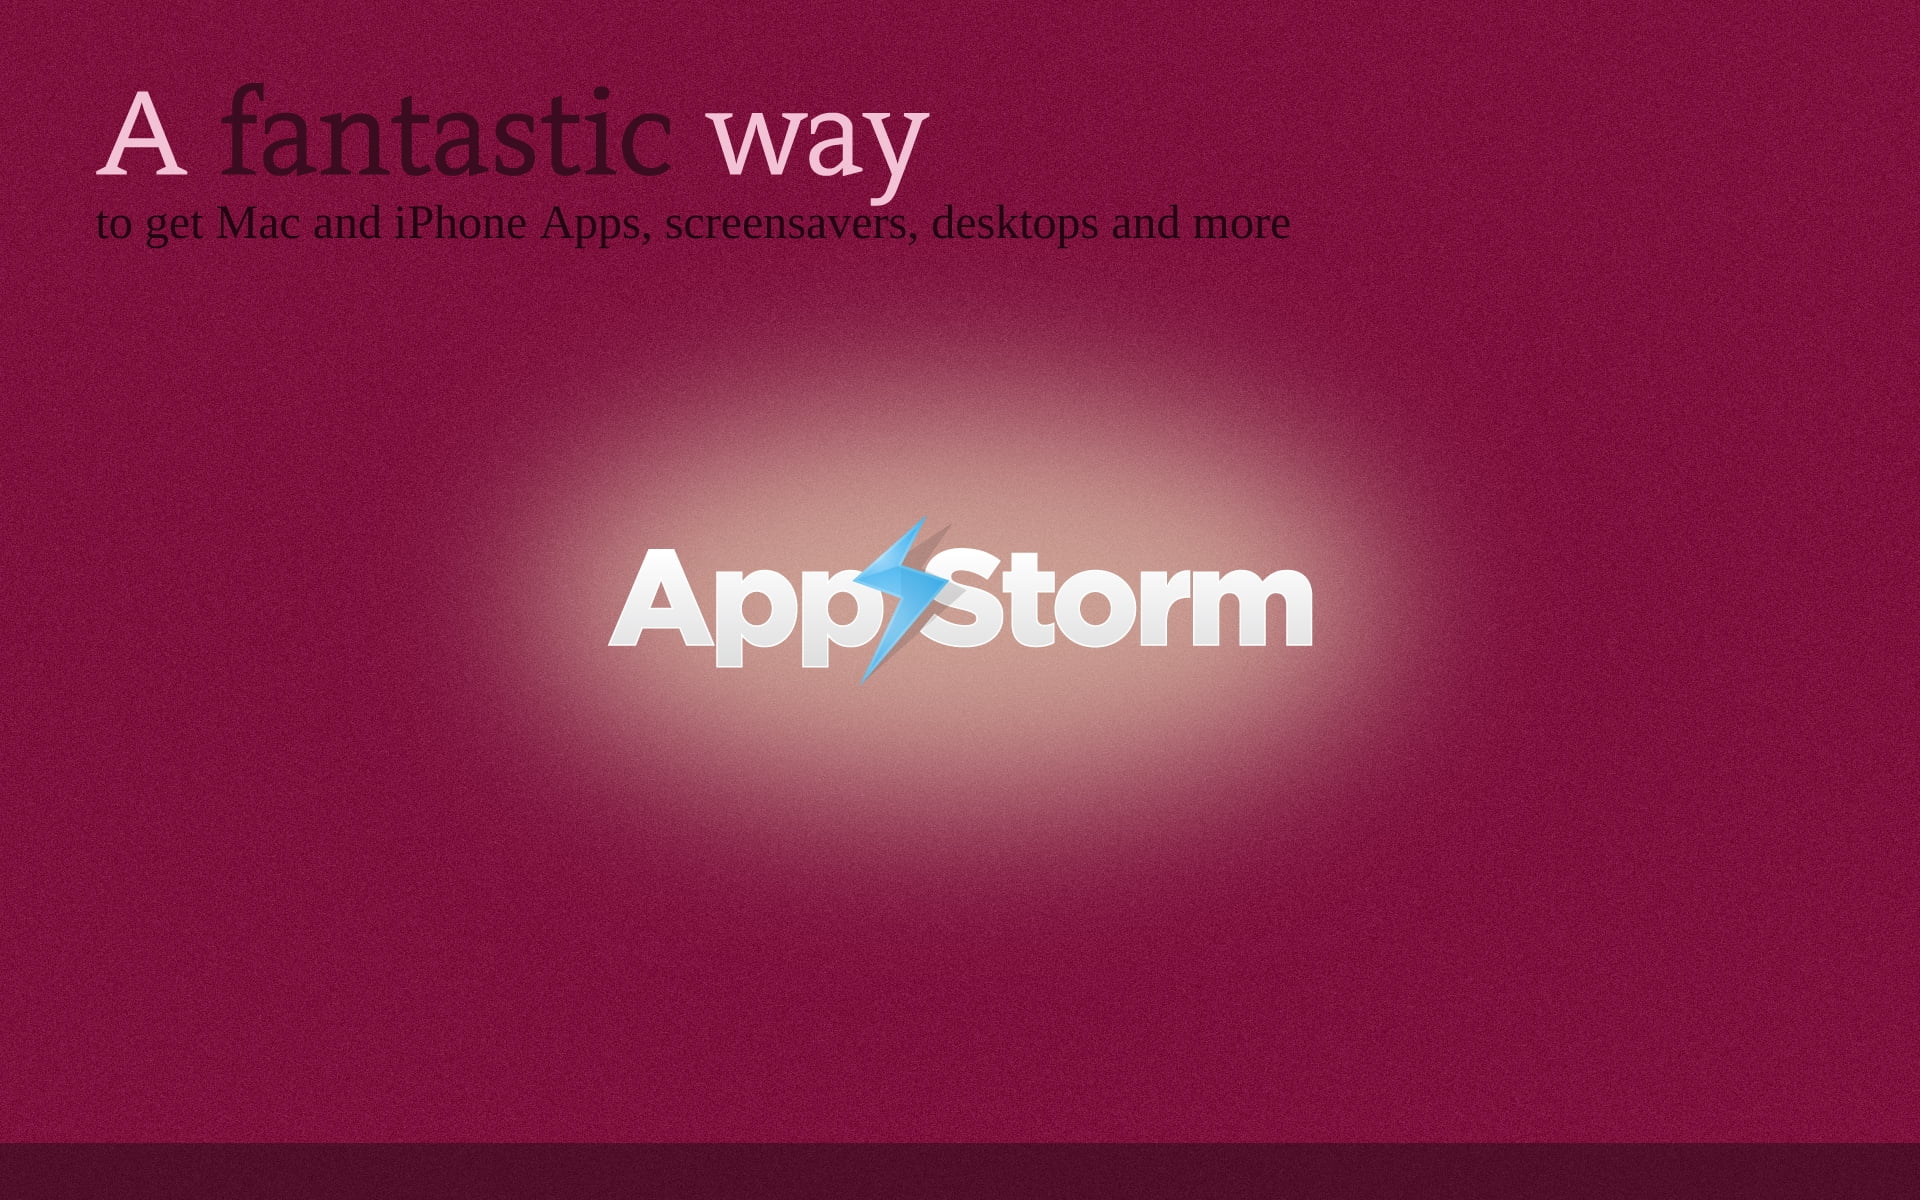 App Storm logo on red background